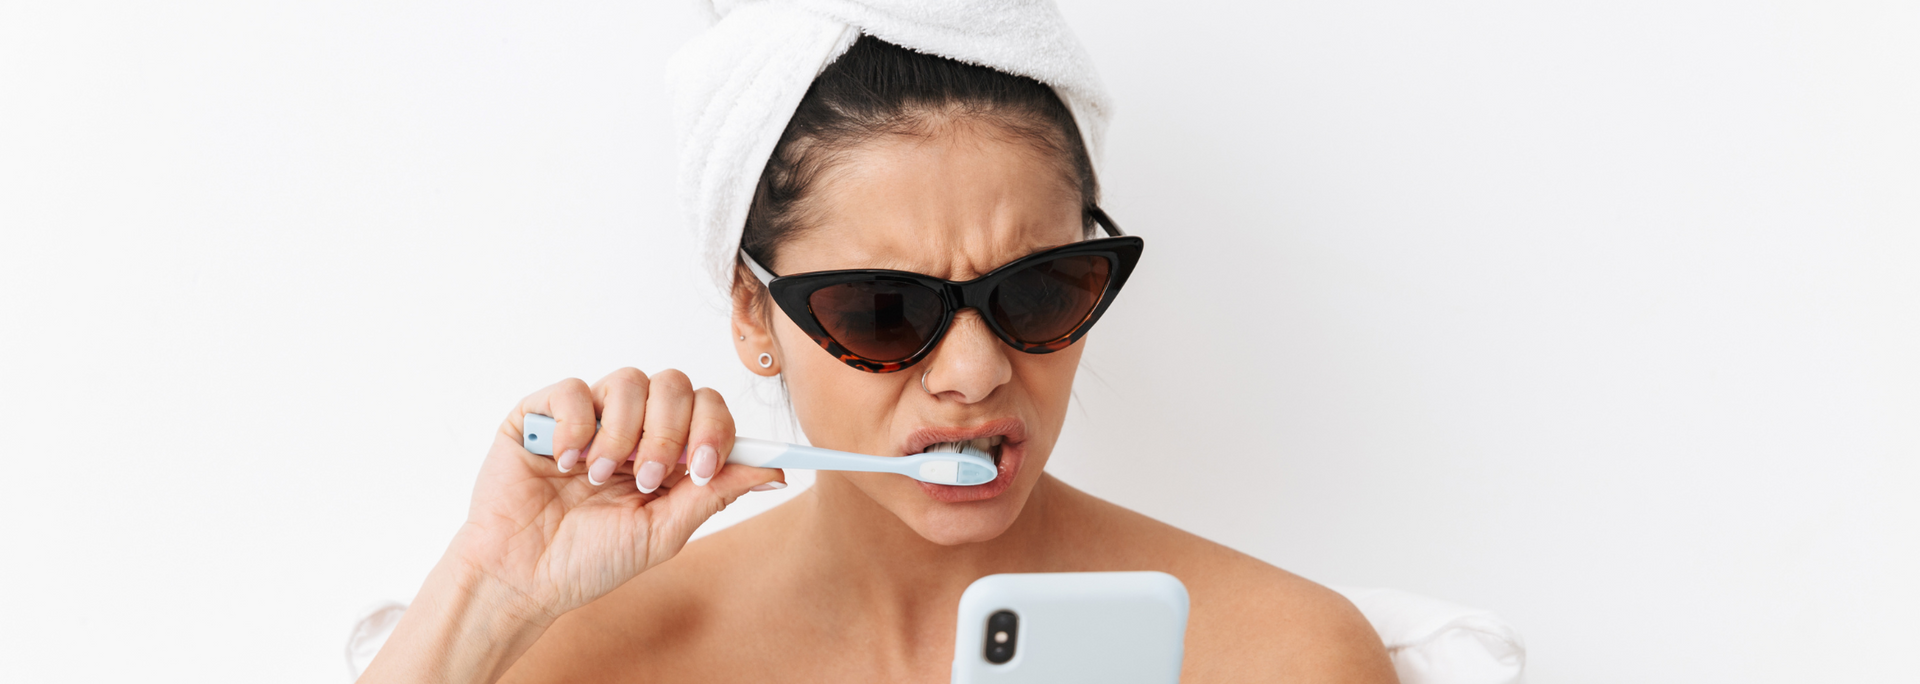 Picture of a woman brushing her teeth while looking at her phone.
